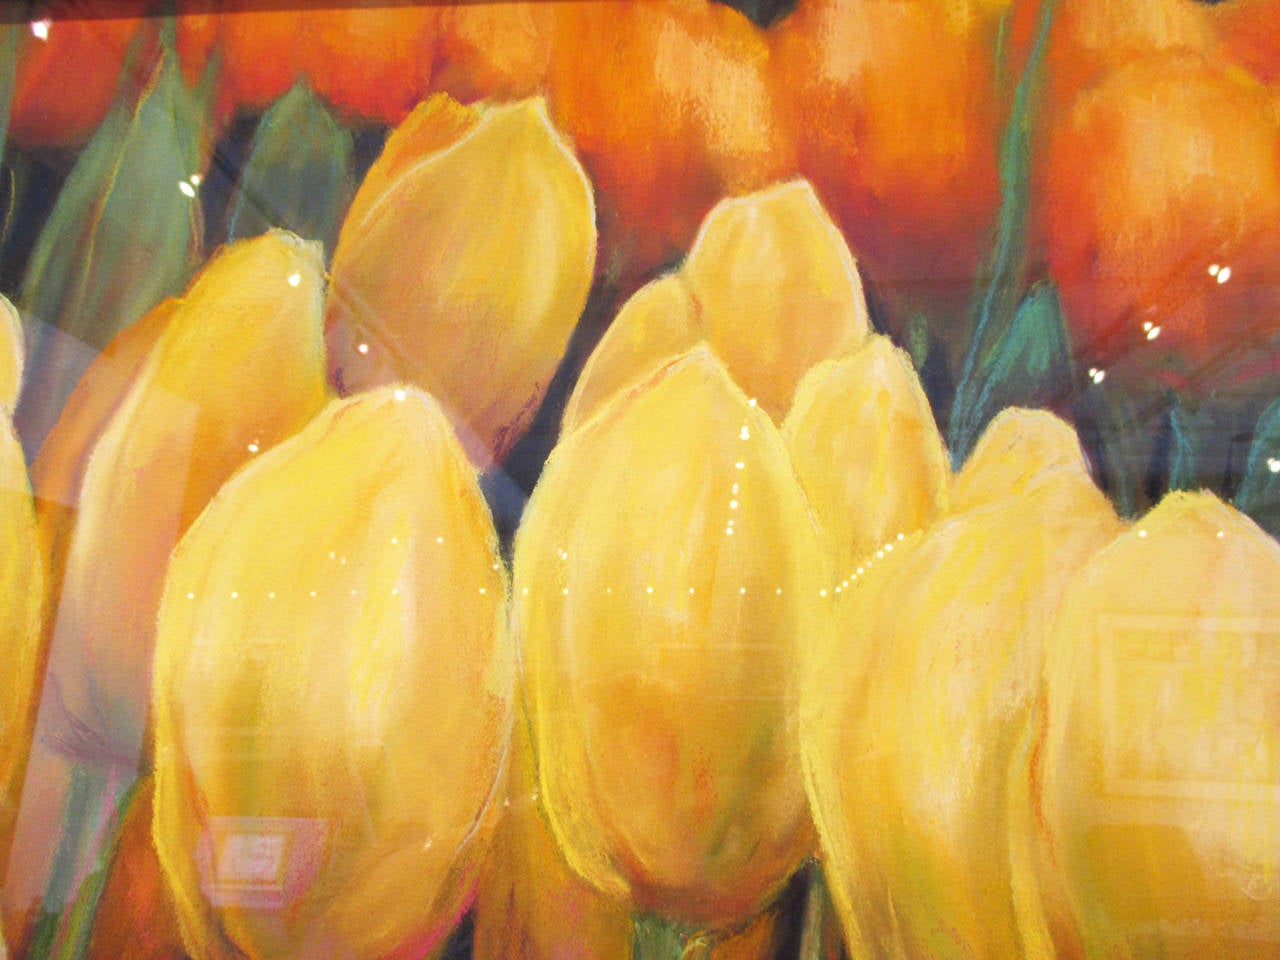 The unique warmth and depth of Pritchard’s works on canvas is due to her specially developed fixative formula which keeps the pastels fresh and permanently adhered to the canvas. Whatever her choice of subject, whether working on paper or canvas,